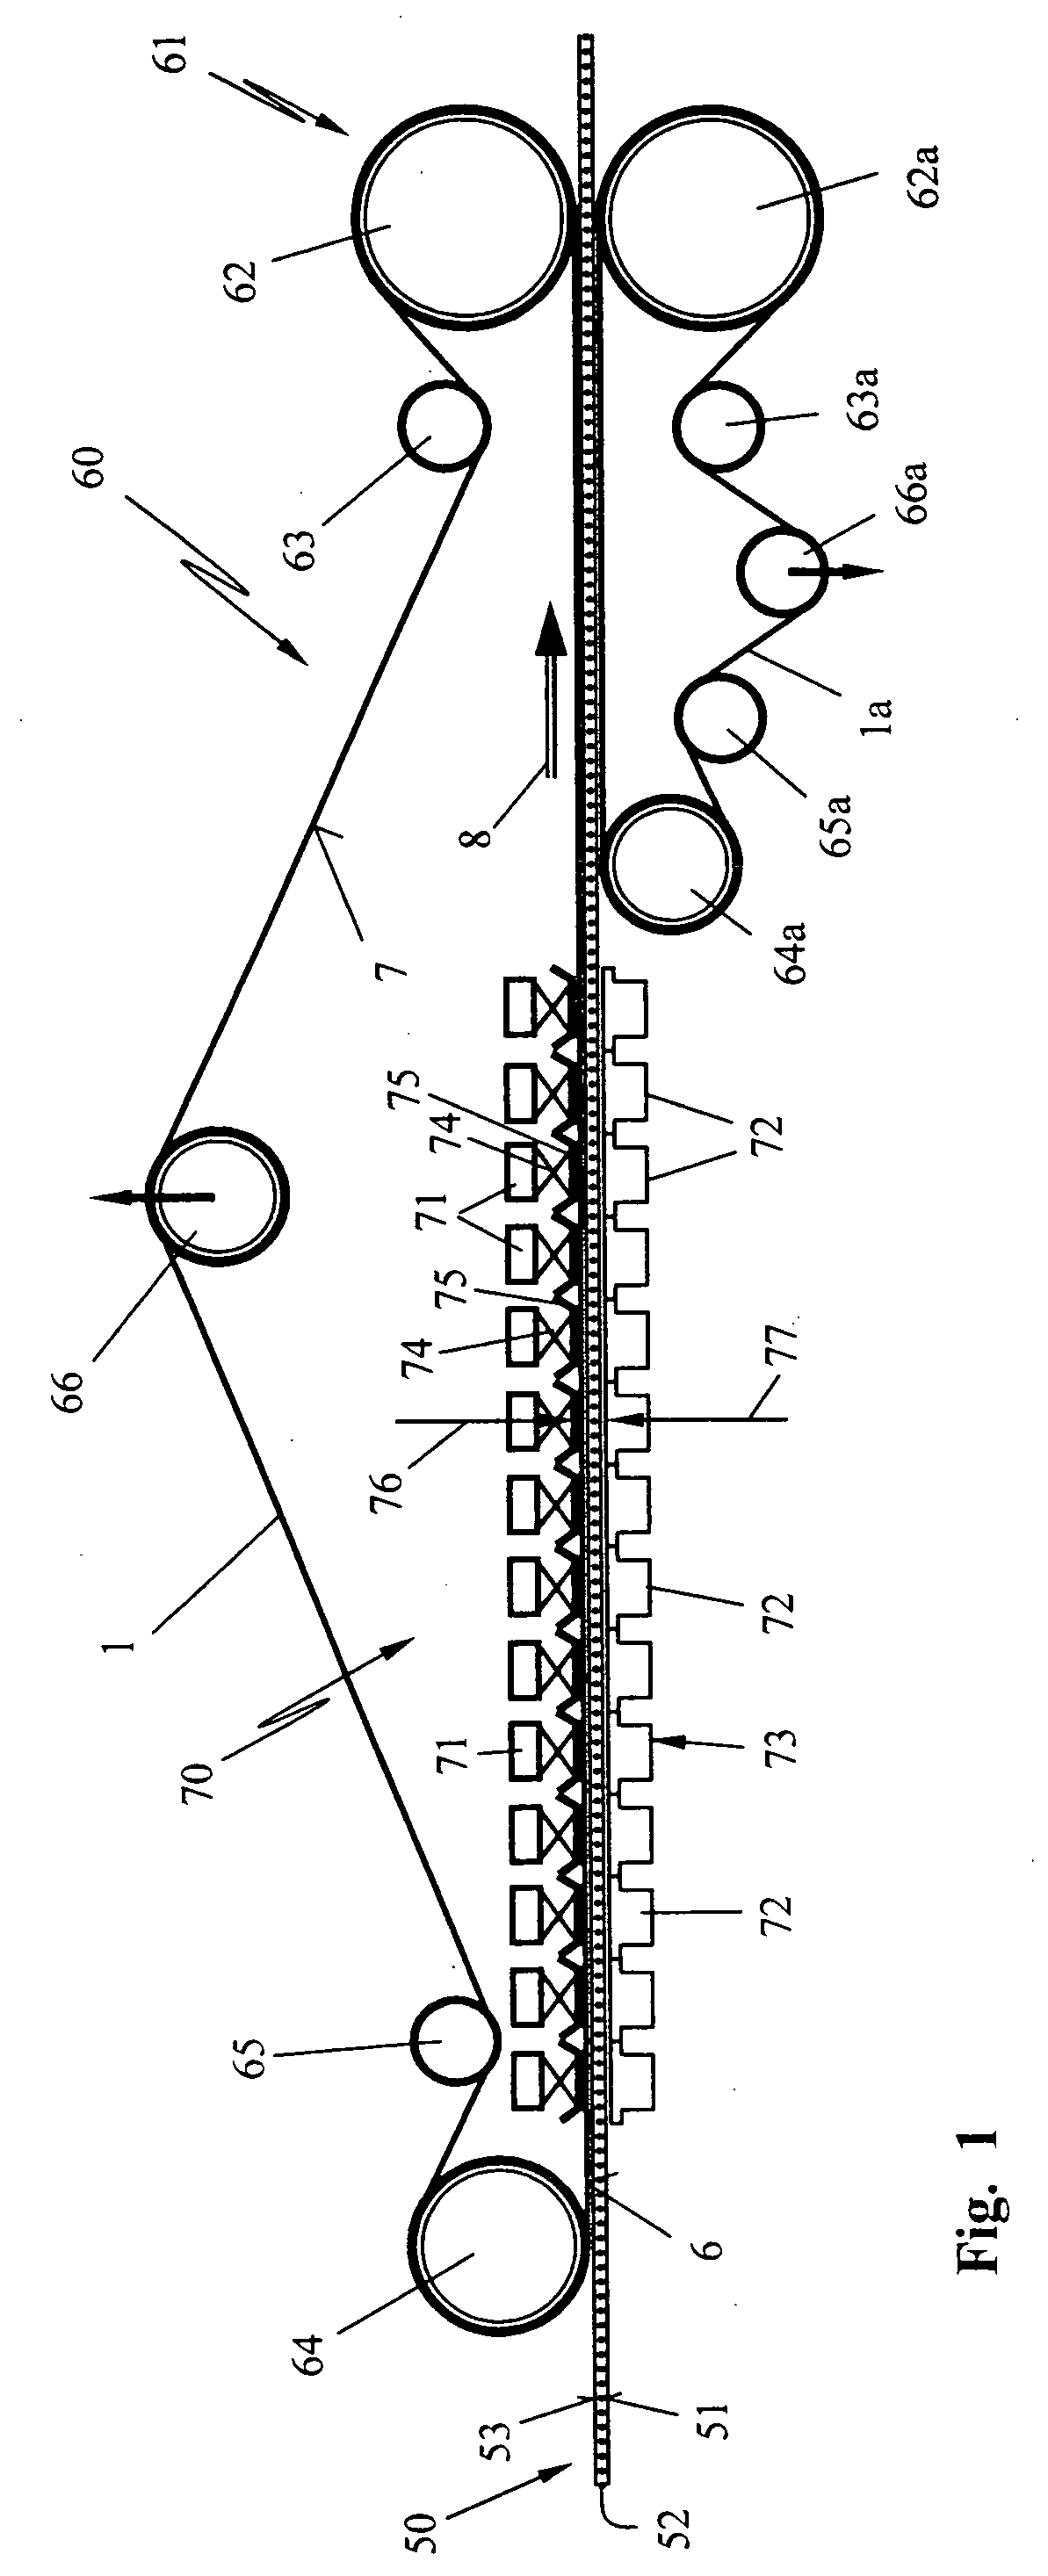 Belt for a corrugator machine having a friction coefficiet reduced driven side